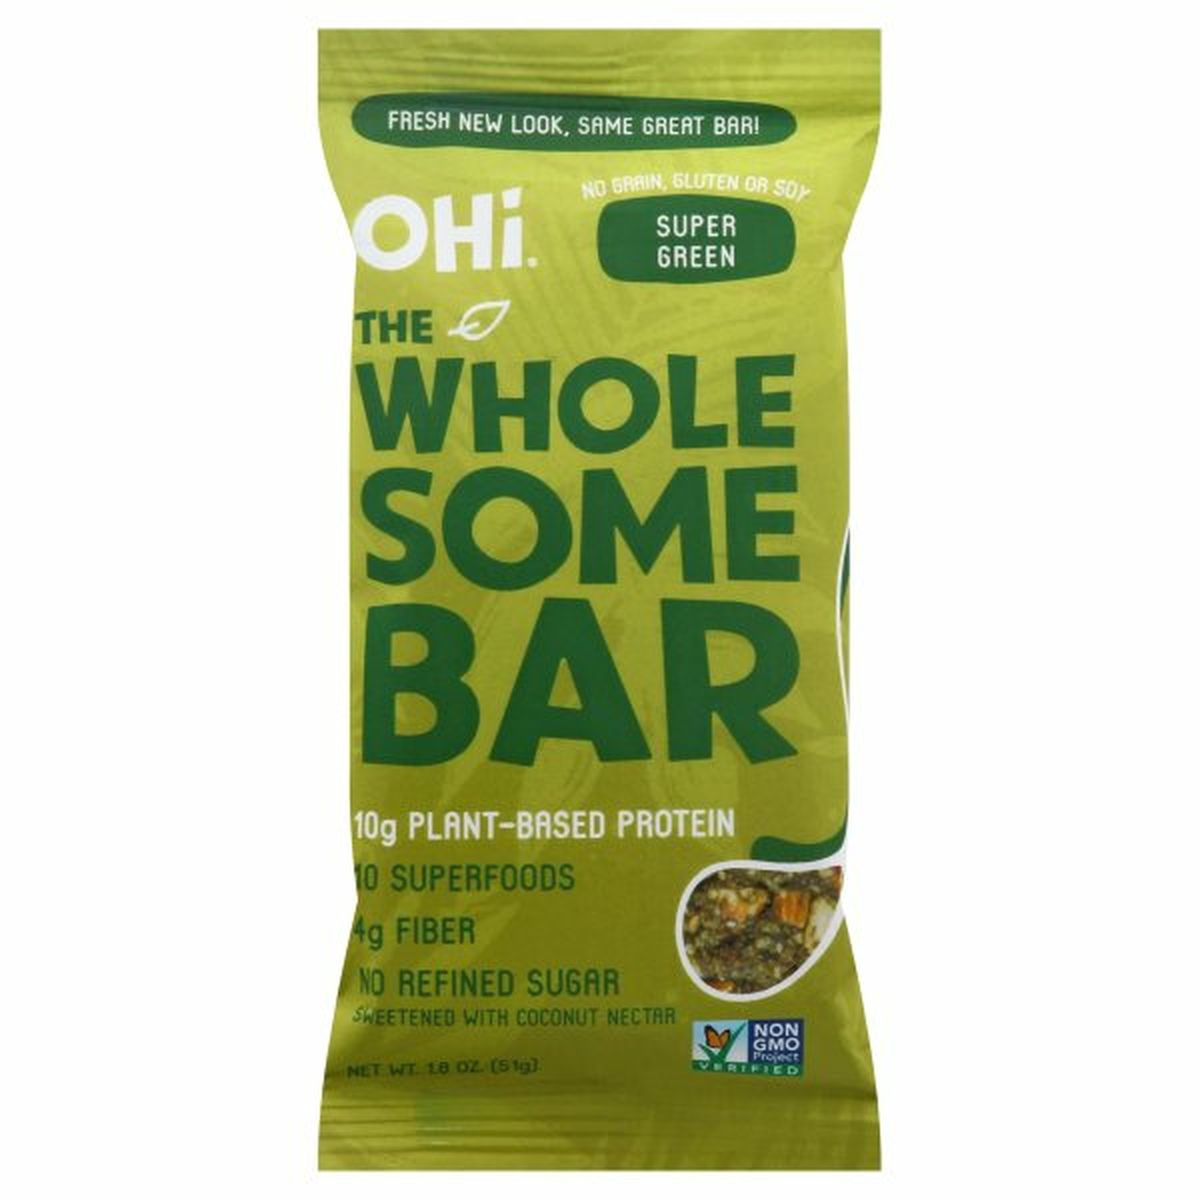 Calories in OHi Wholesome Bar, Super Green